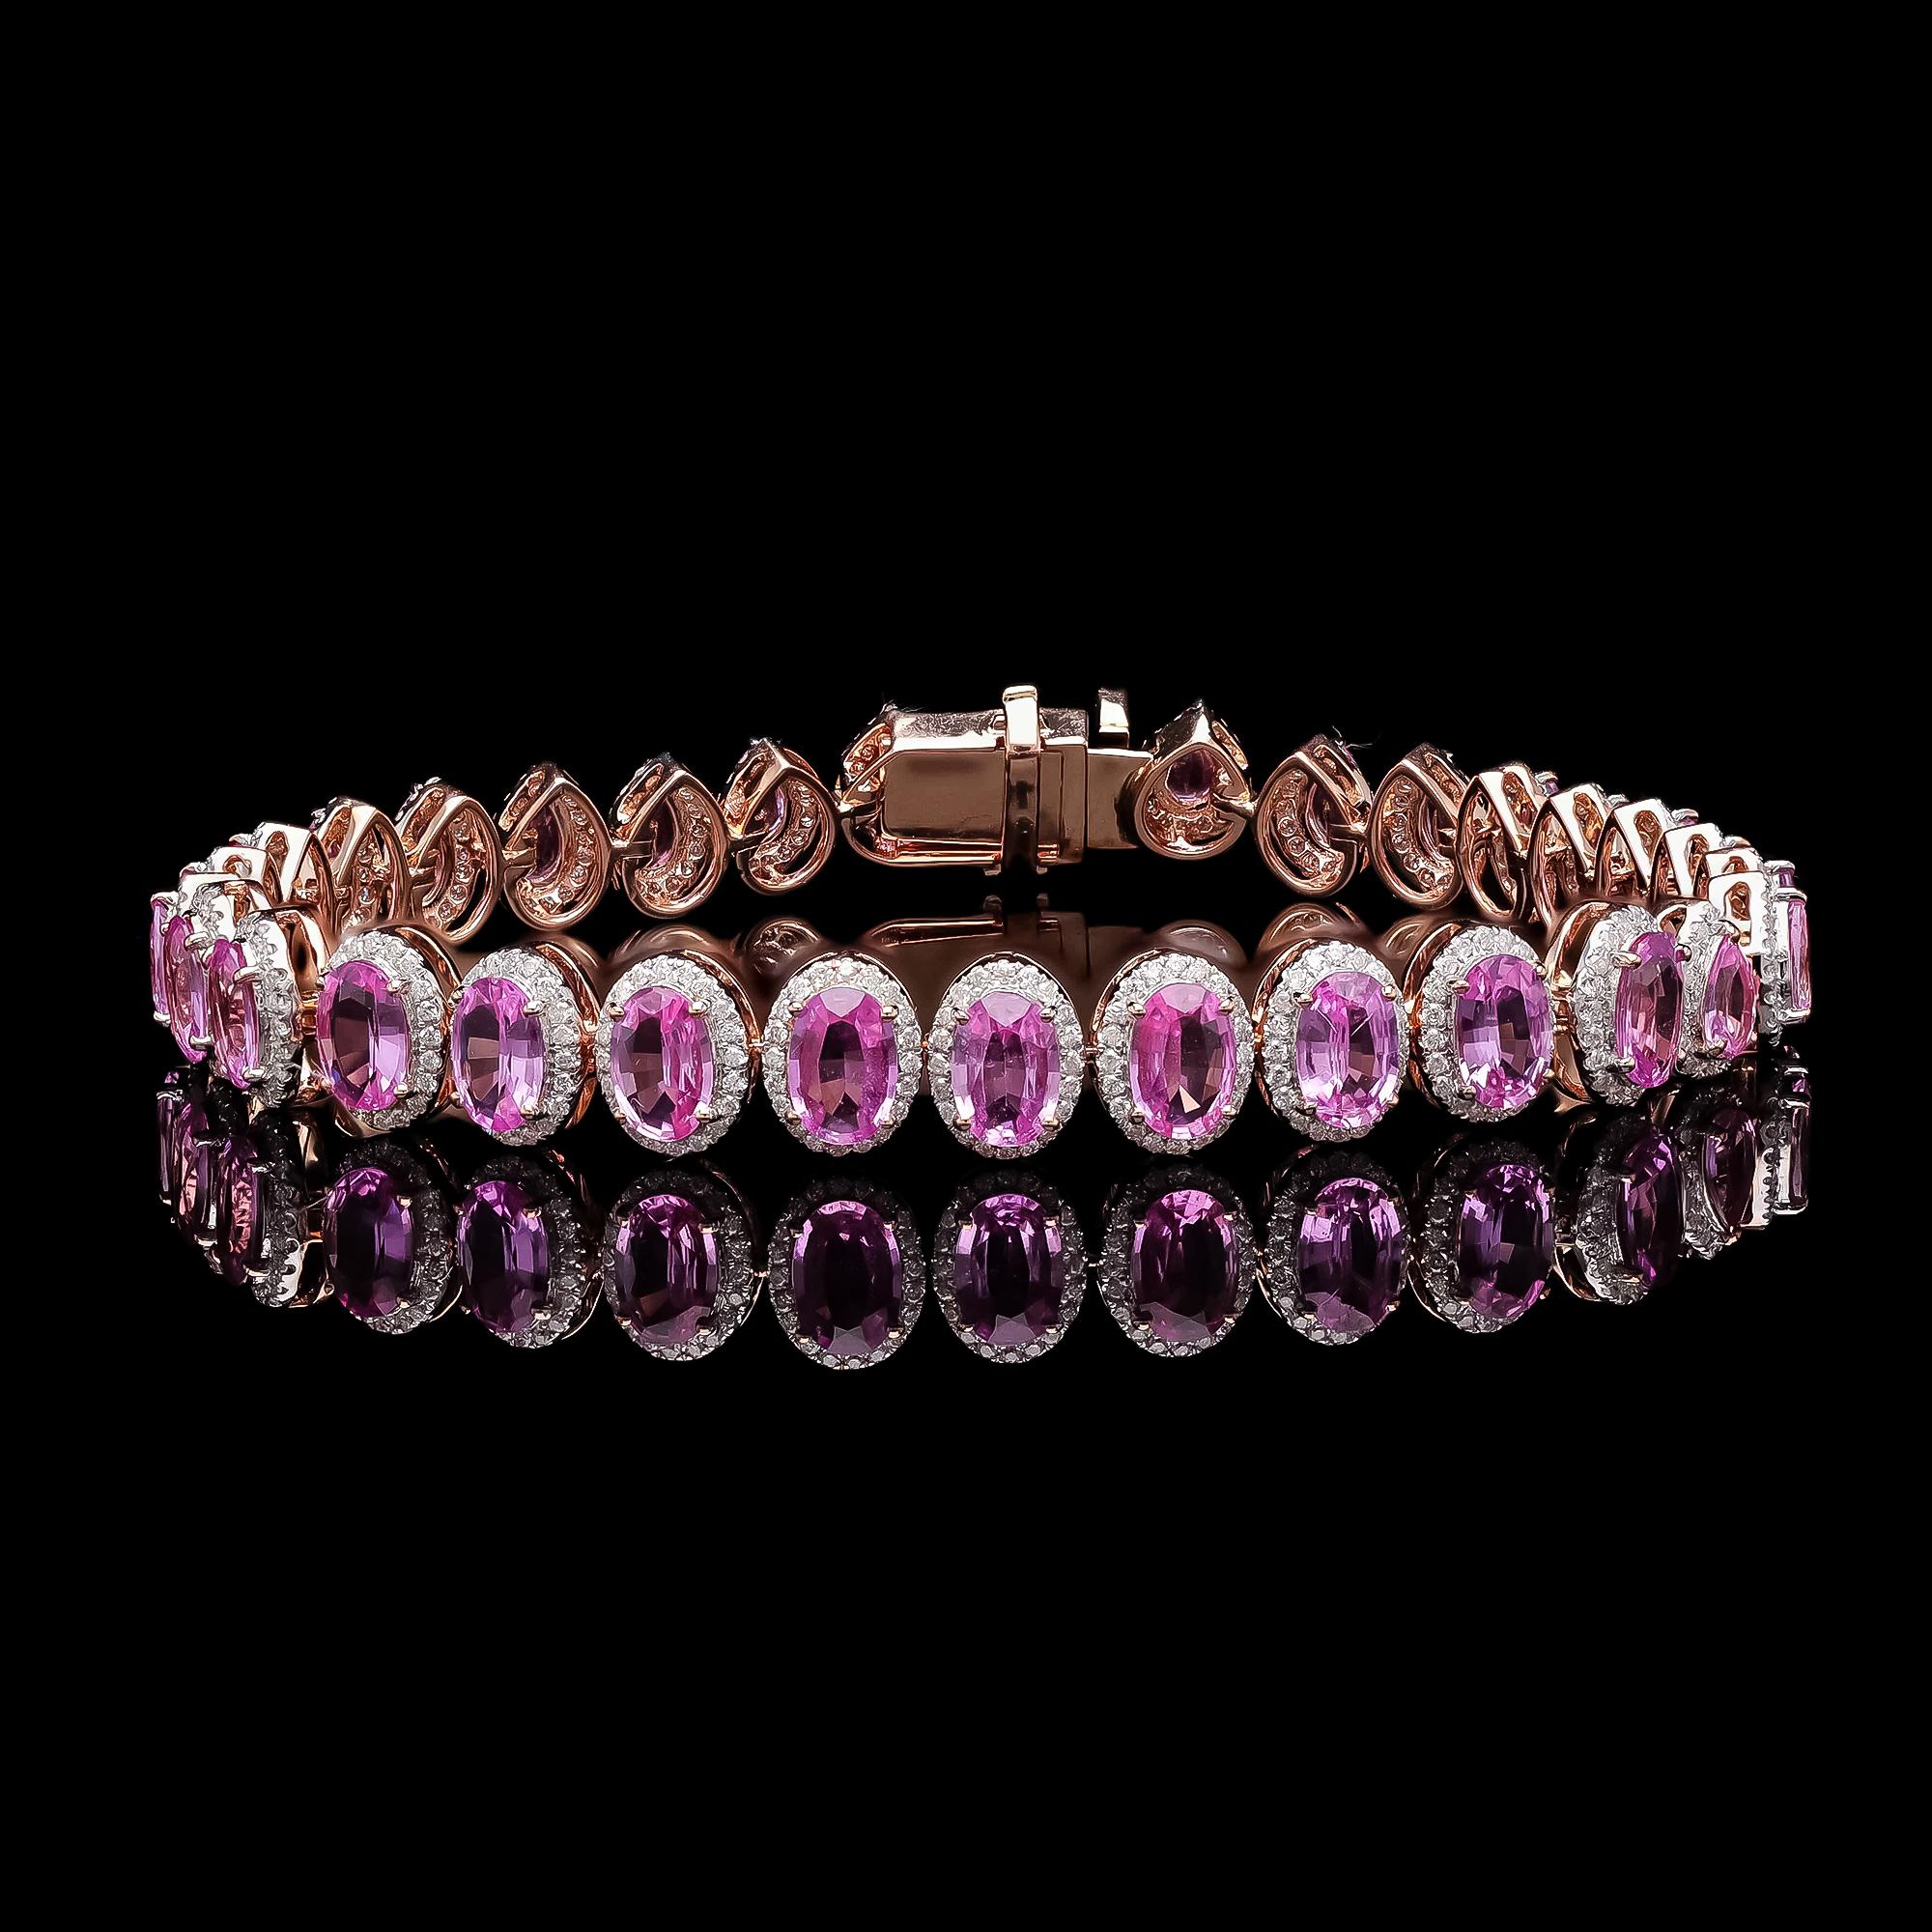 This is a beautiful 18K Gold Pink Sapphire and Diamond bracelet with a chain also made up of 18K Gold. High-quality natural diamonds and pink sapphire is used in this product. It is ideal for every occasion.
Item Specifications :
Gold Weight: 12.31